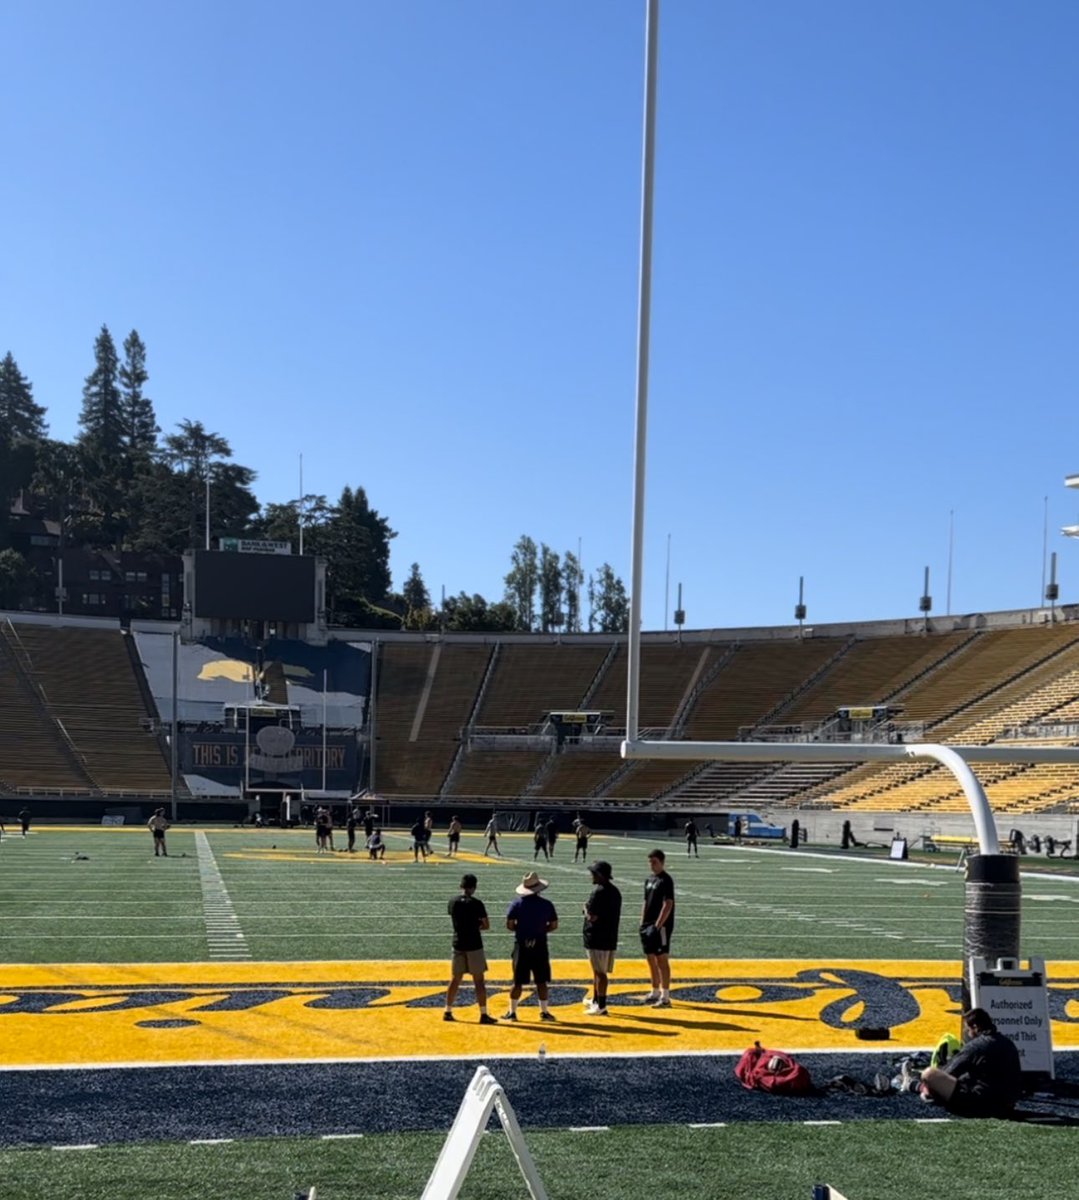 Thank you E-Sports Bay Area, @SpecialOlympics @CalFootball @V_Pilcher10 for having me out at the Cal Golden Buddies Camp today. Had a great time working with the kids! @axl_yarbrough